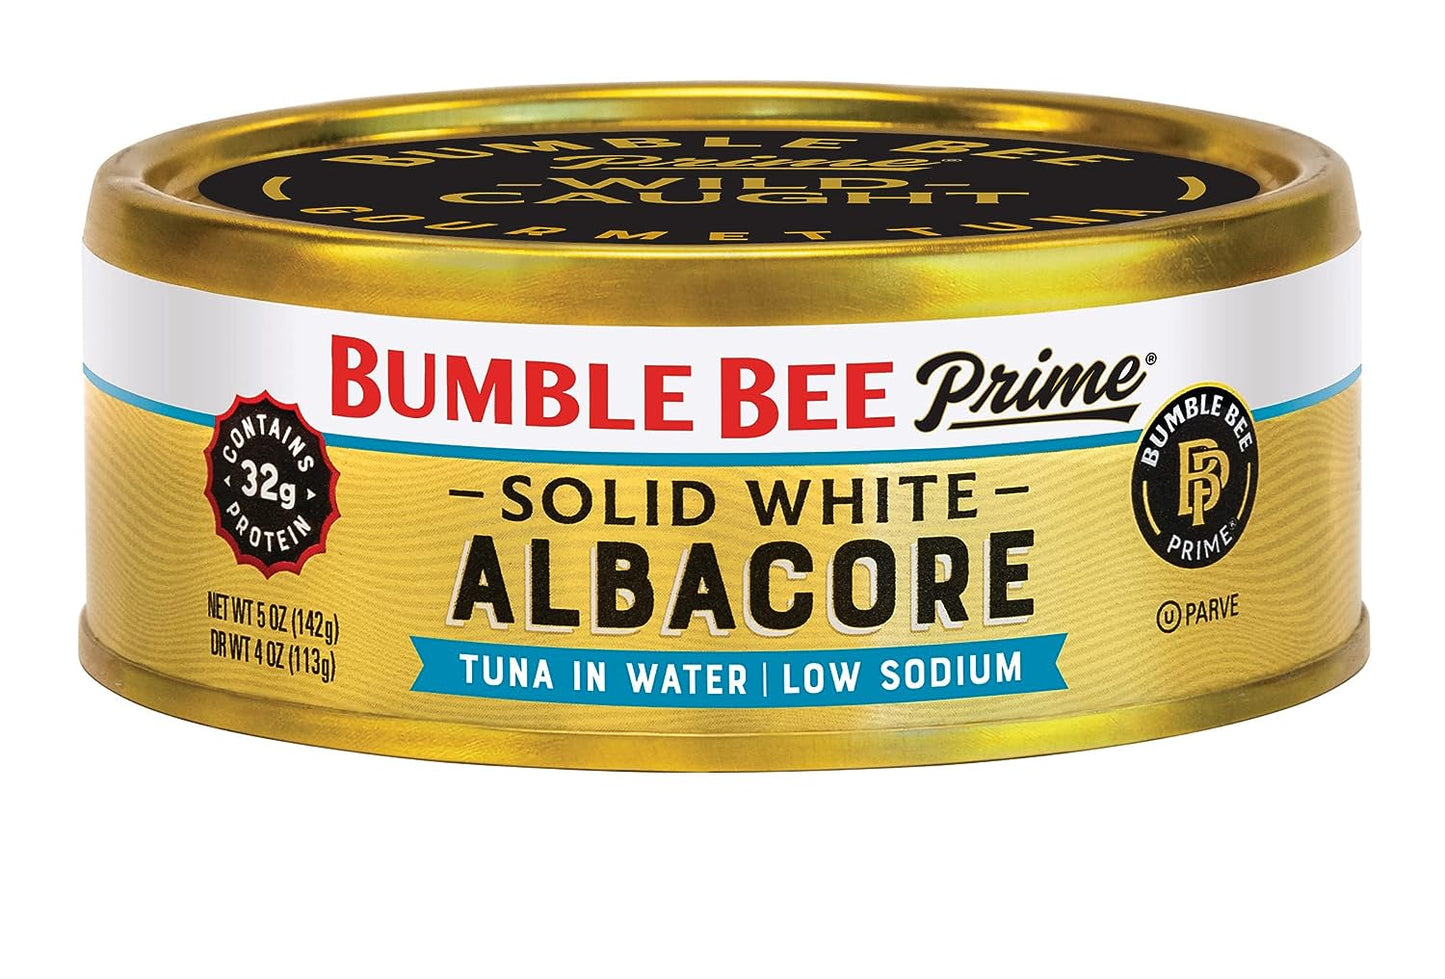 Bumble Bee Prime Solid White Albacore Tuna Low Sodium in Water, 5 oz Cans (Pack of 12) - Premium Wild Caught Tuna - 31g Protein per Serving - Non-GMO Project Verified, Gluten Free, Kosher